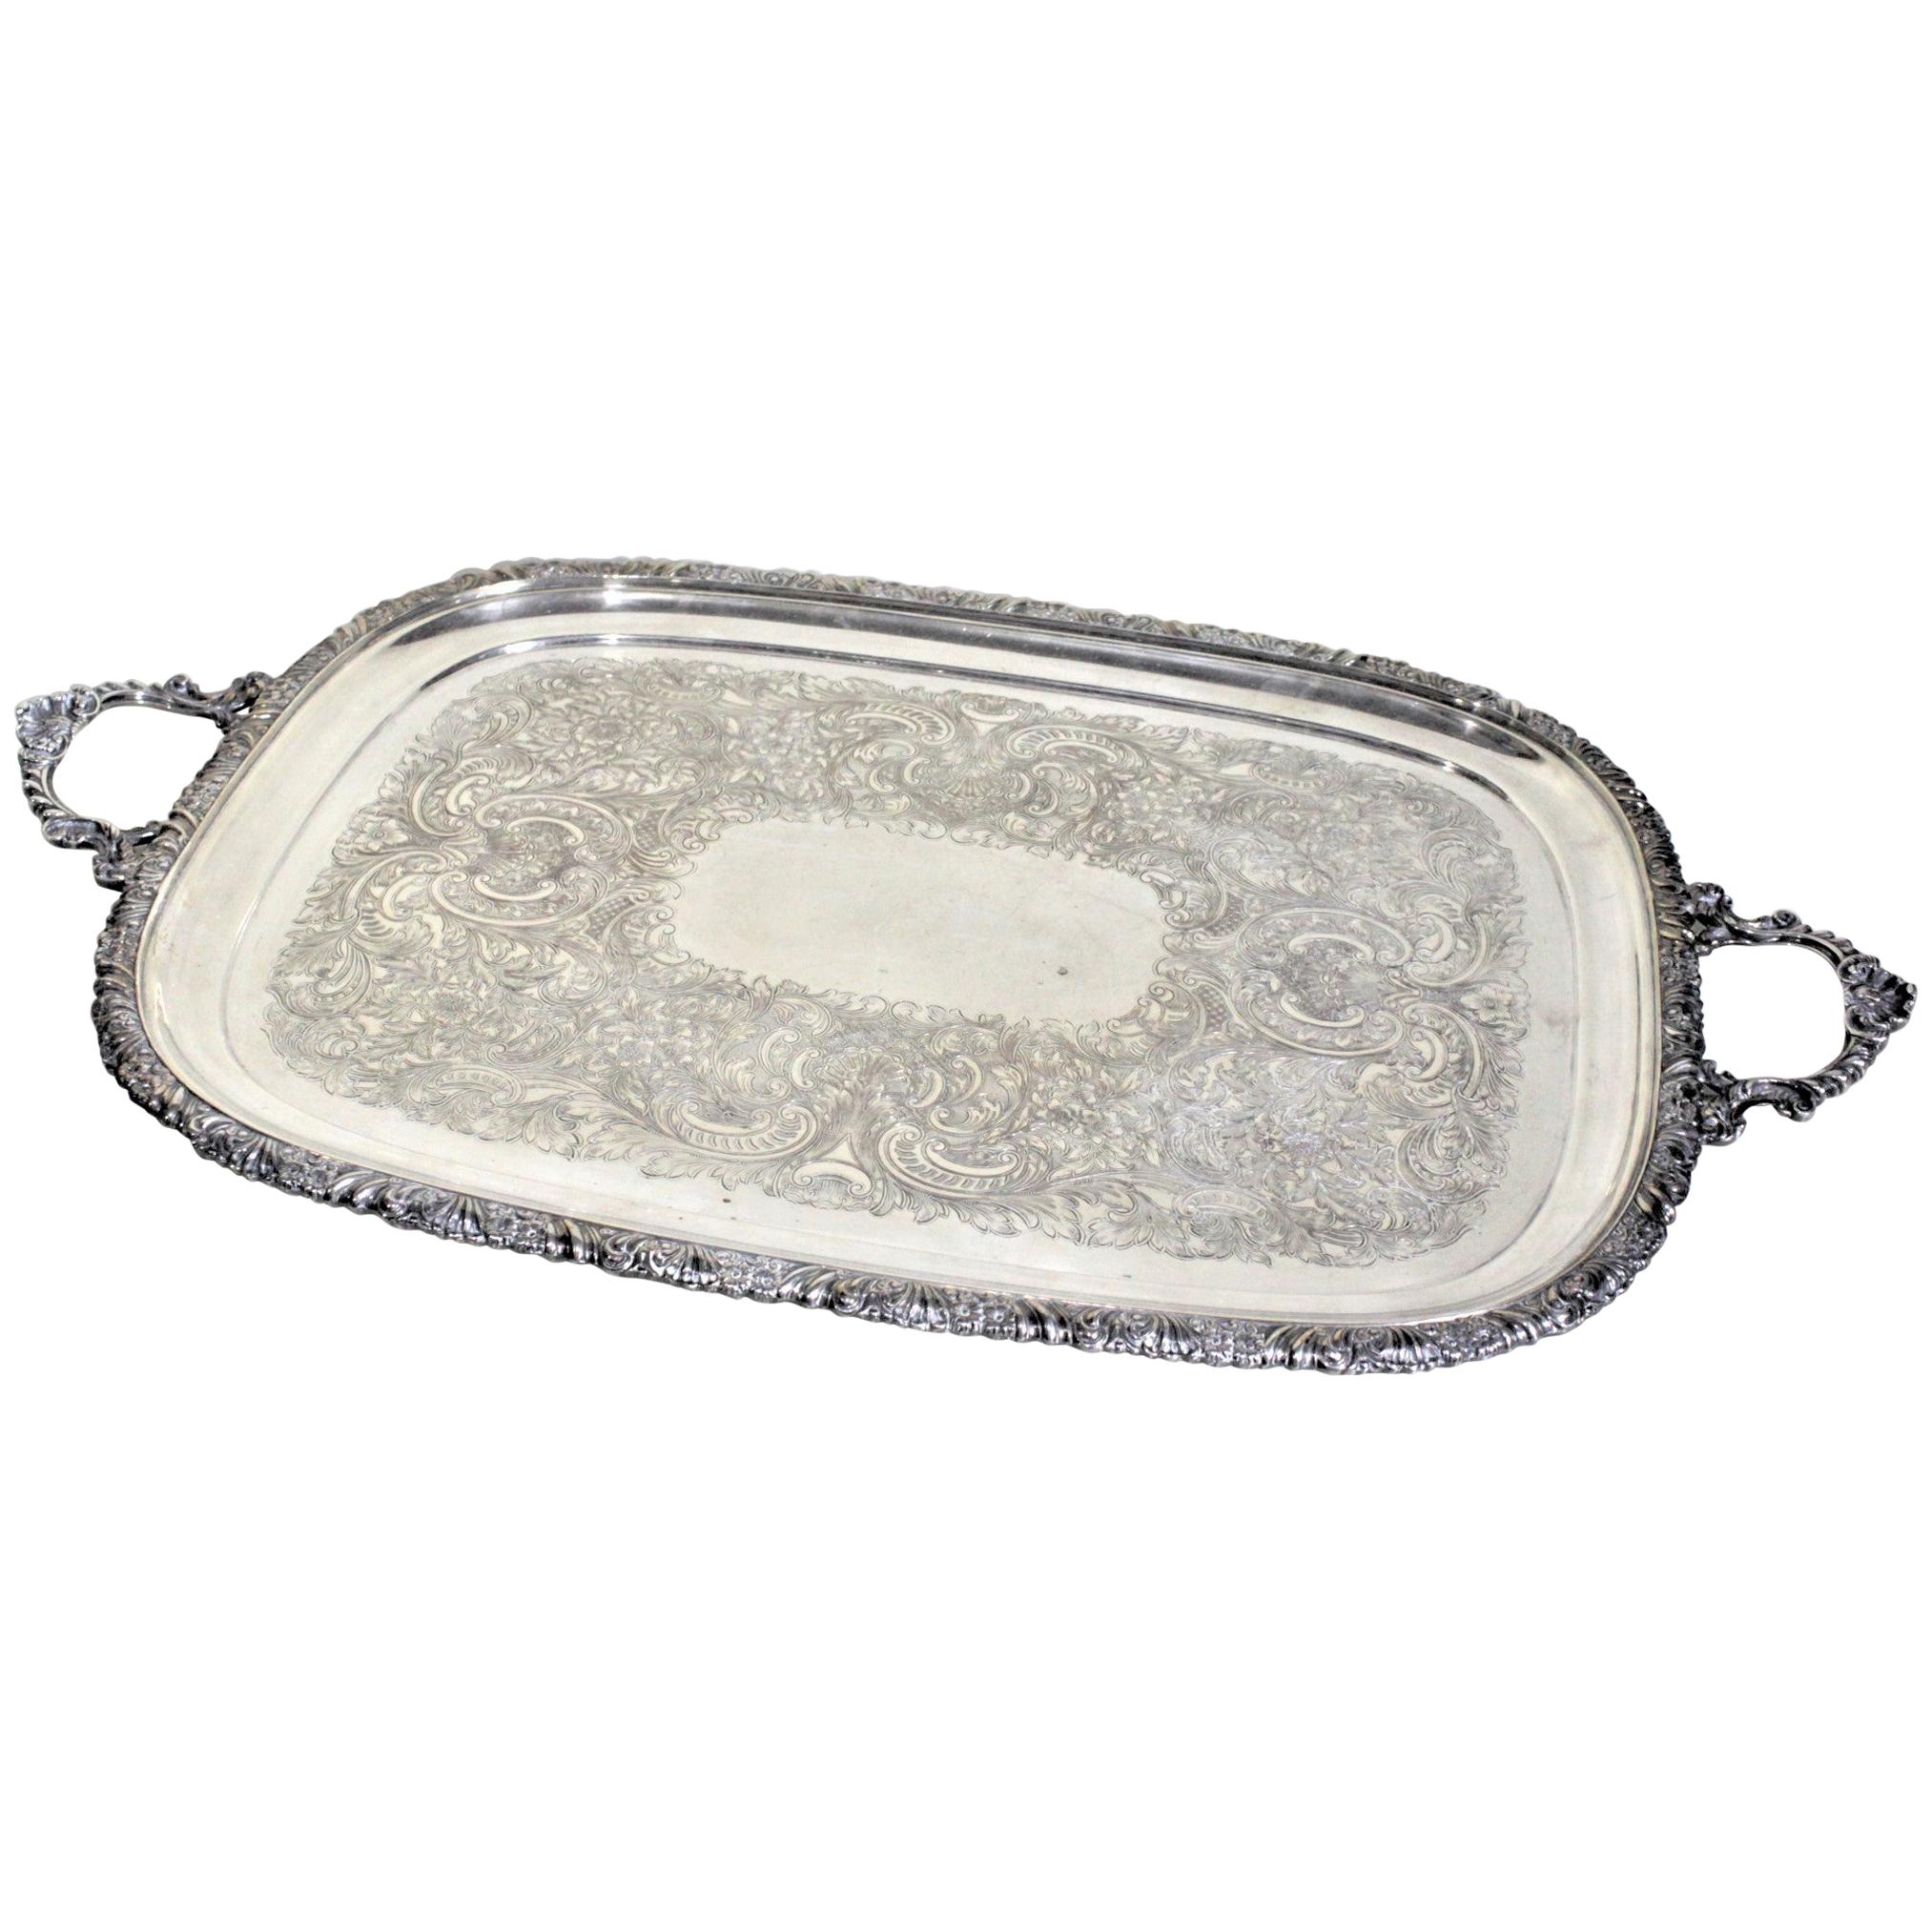 Antique English Silver Plated Serving Tray with Ornate Accents & Engraving For Sale